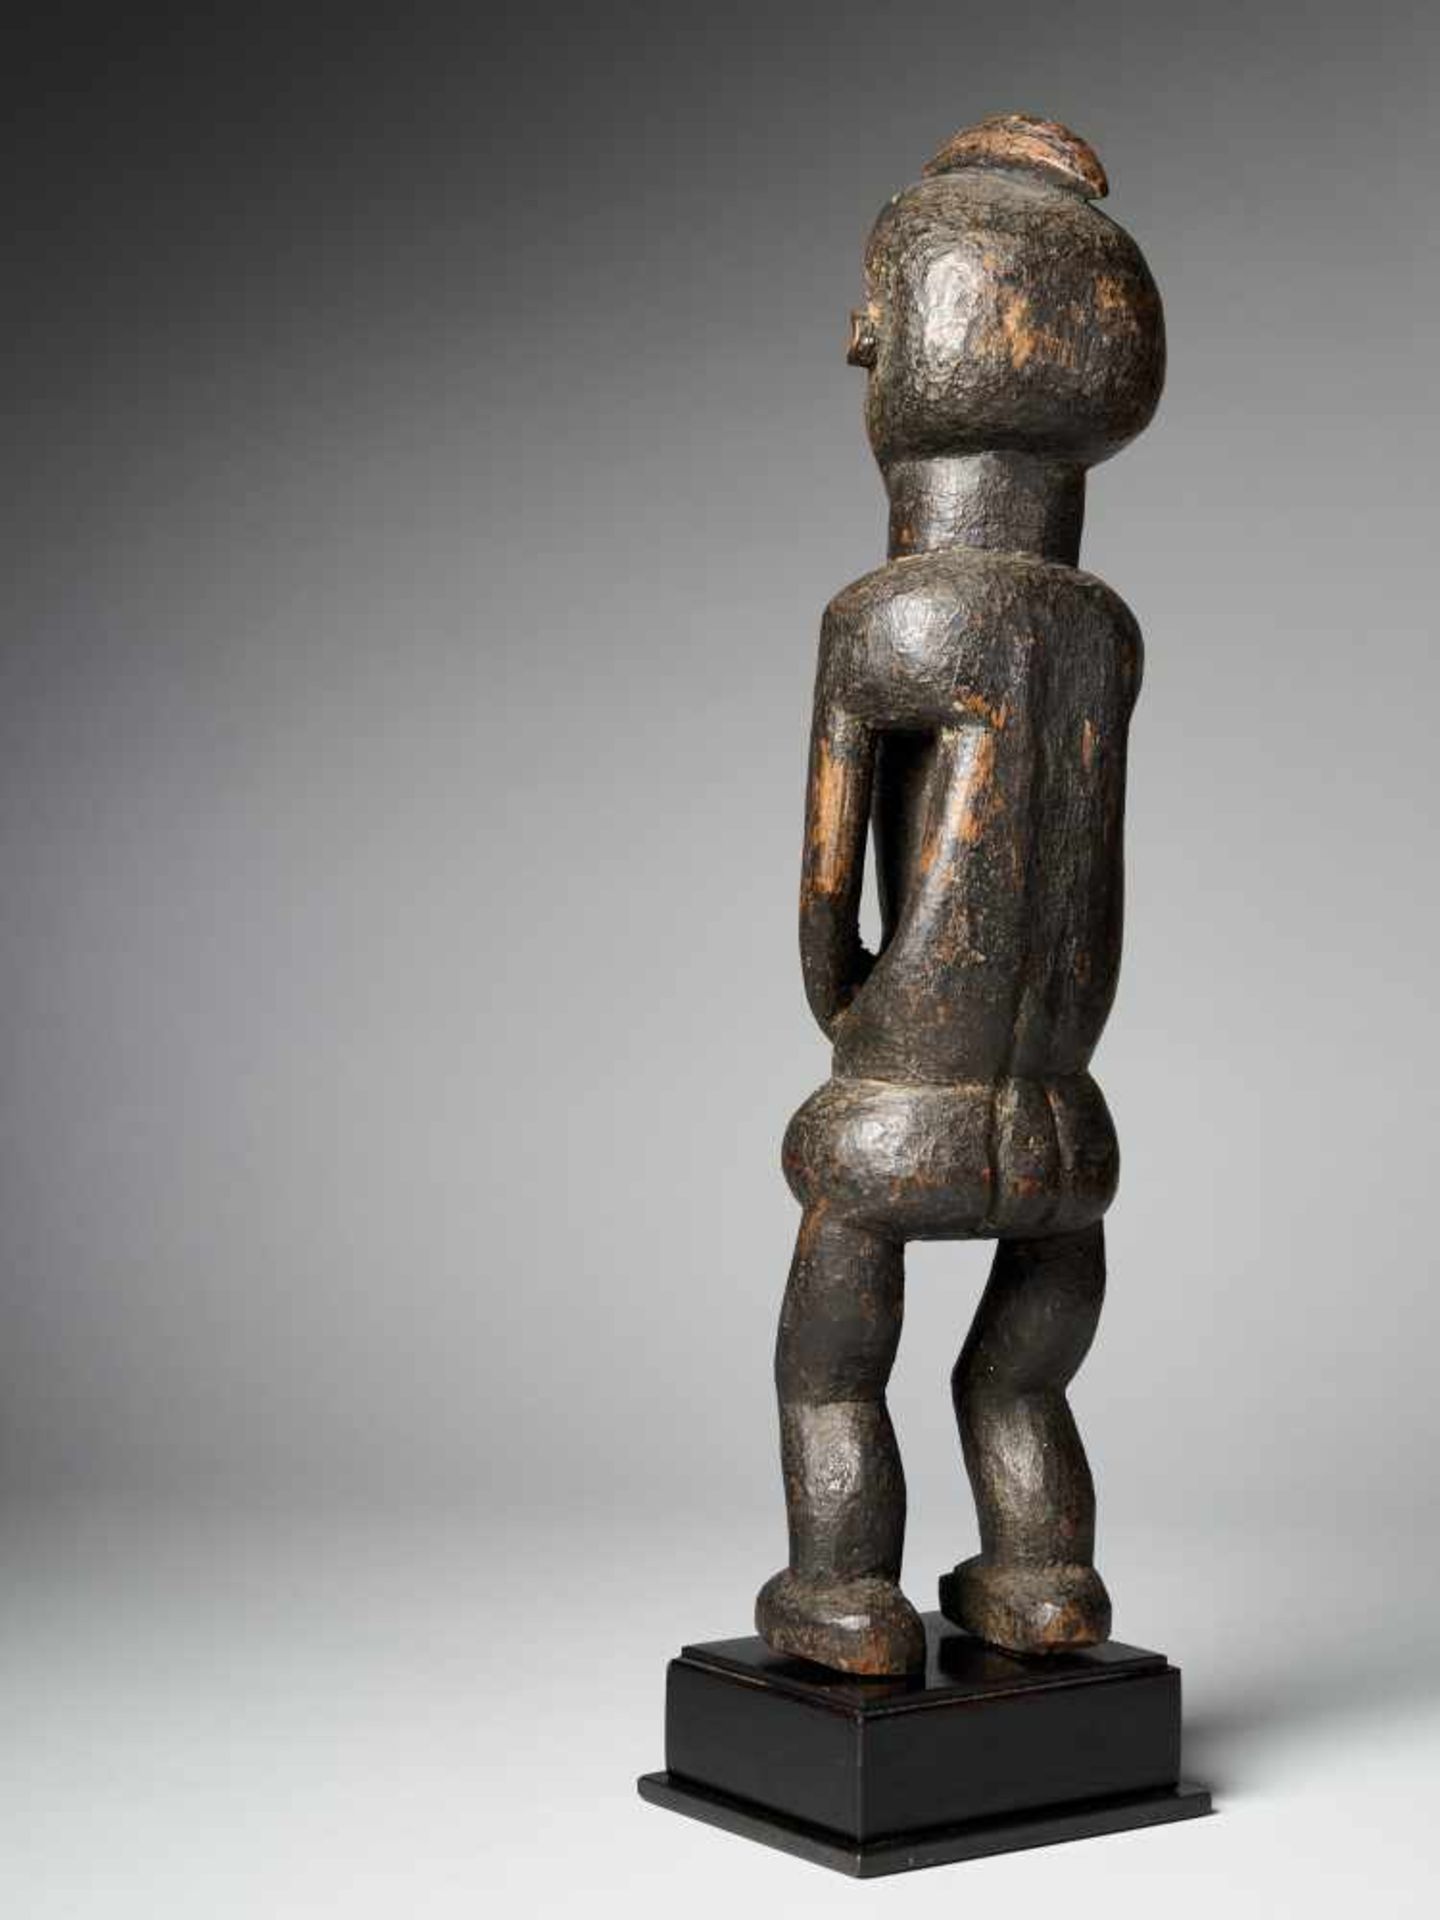 Female Holo statue 'Mvunzi' with traces of Polychrome - Tribal ArtThe Cult statue Mvunzi, represents - Image 3 of 6